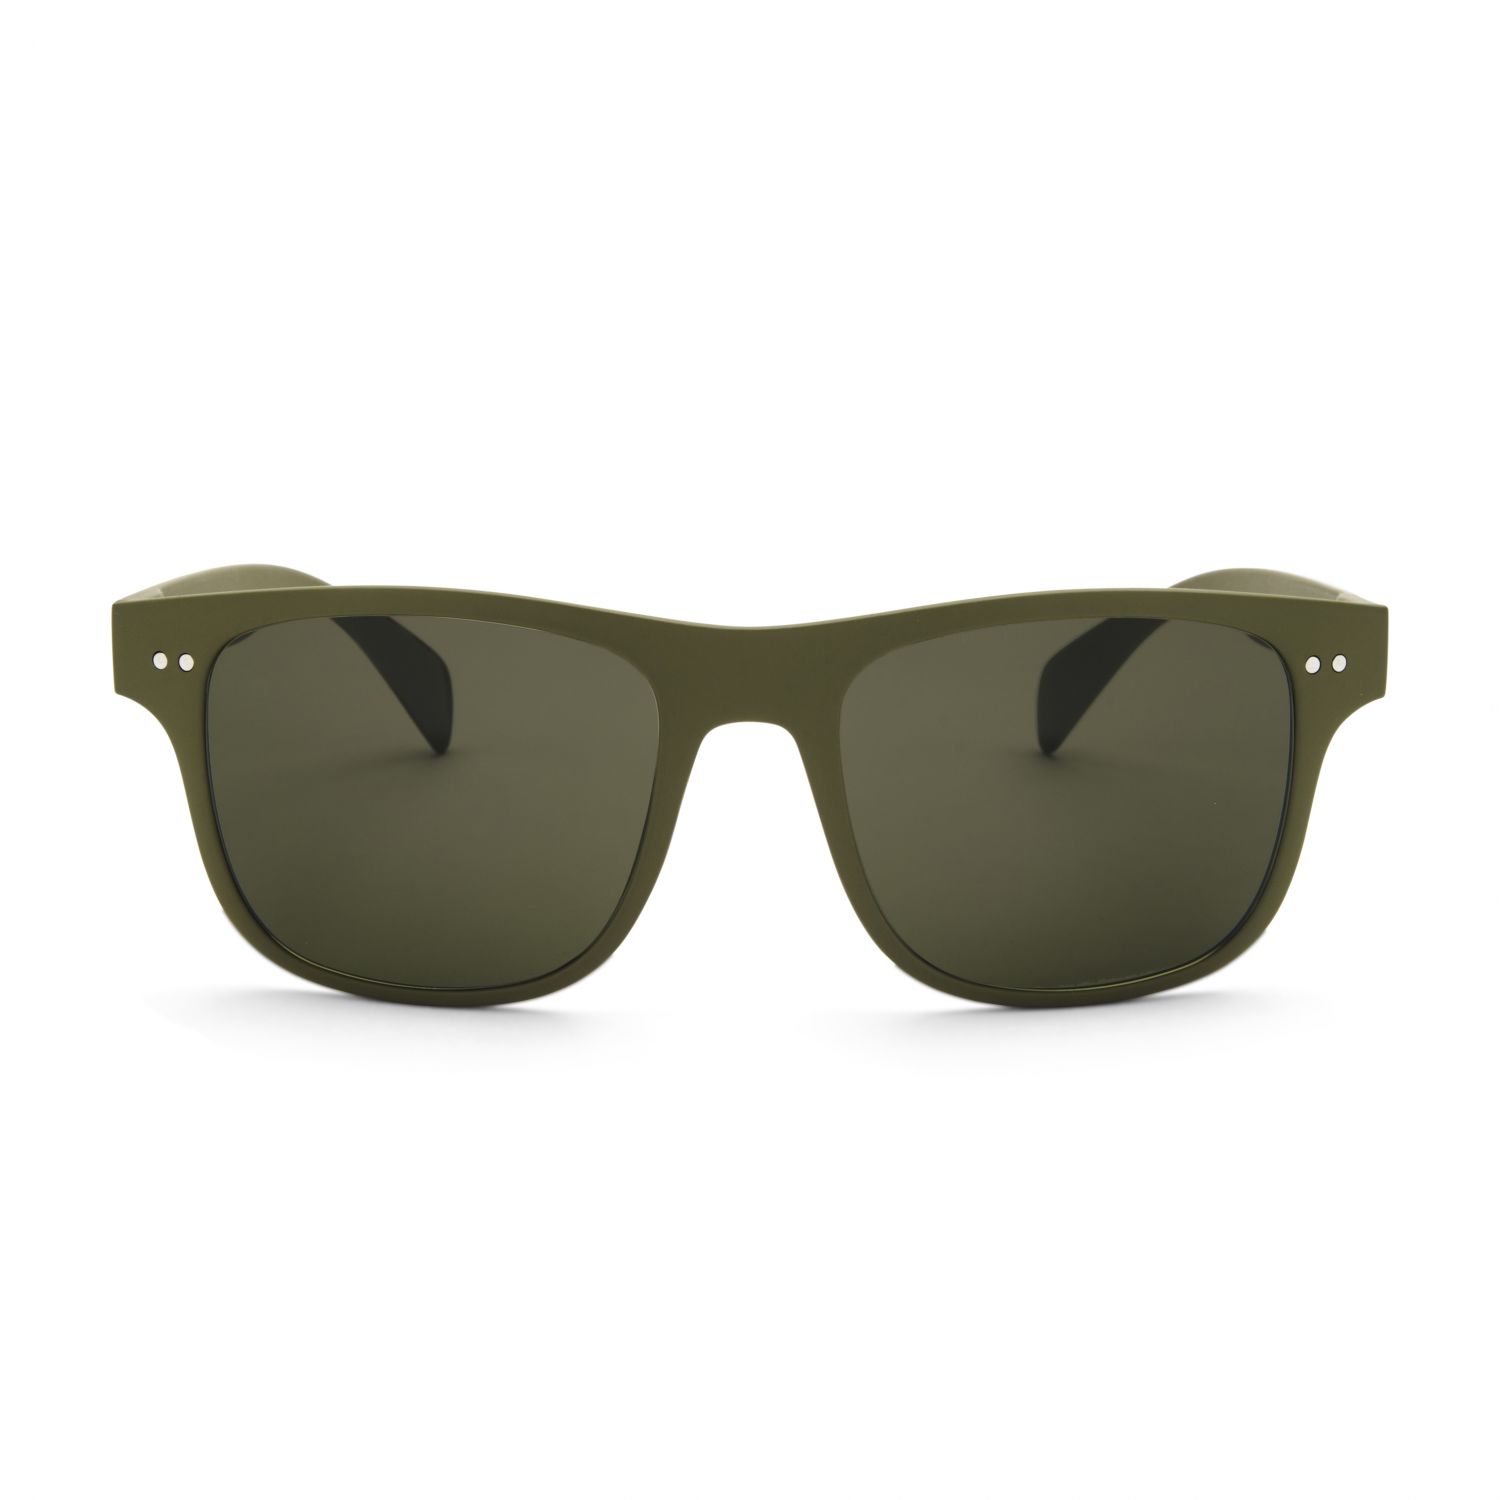 MessyWeekend Tempo, sunglasses, army